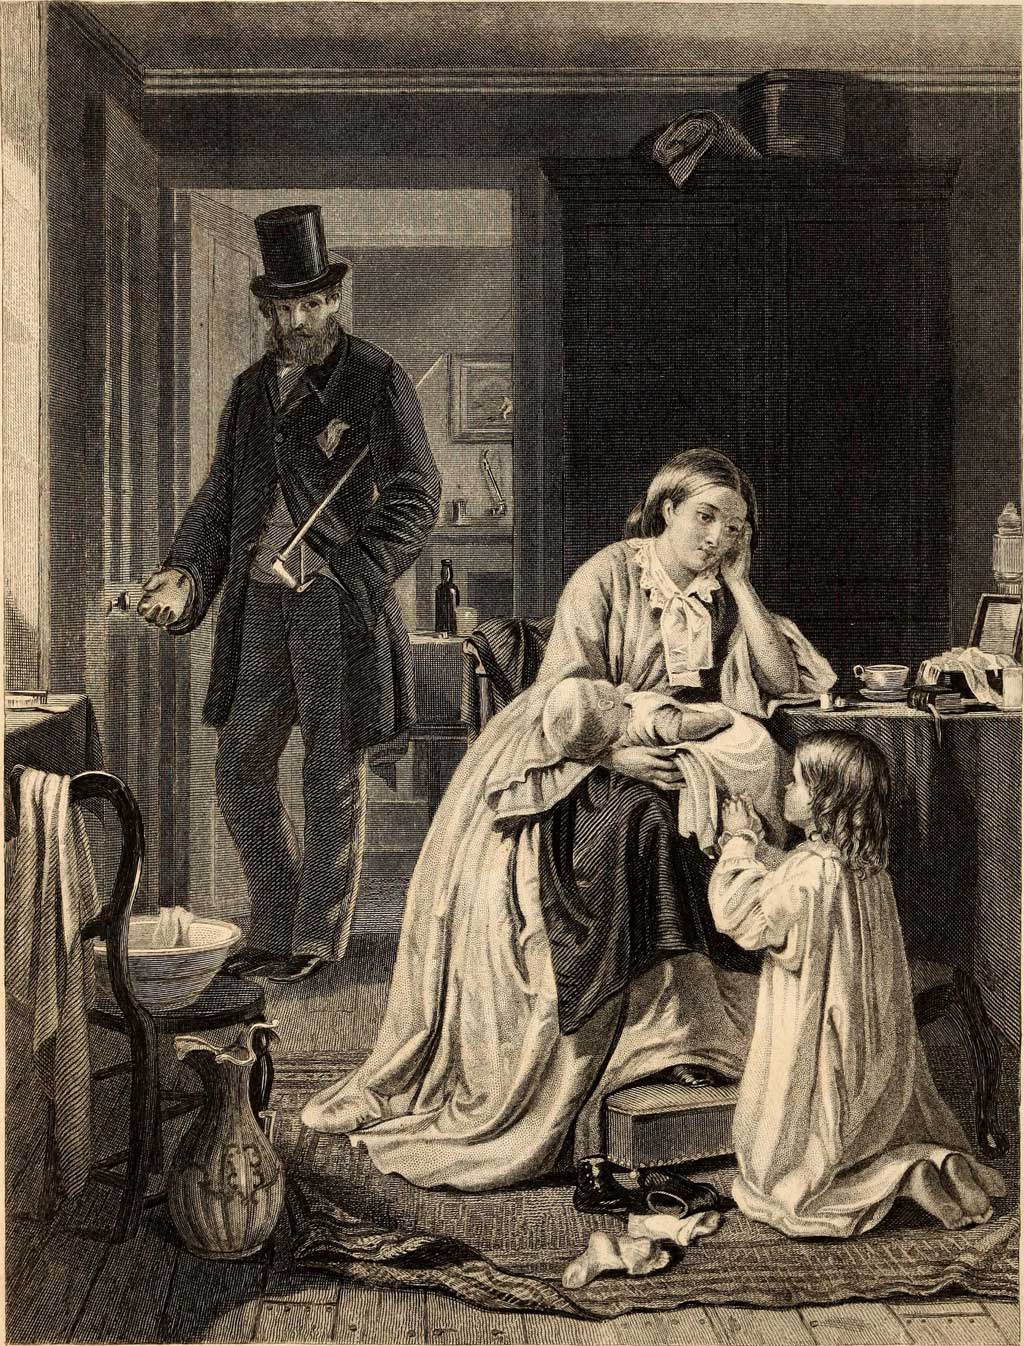 Household scene showing husband walking out the door, while woman holds baby and attends to small girl